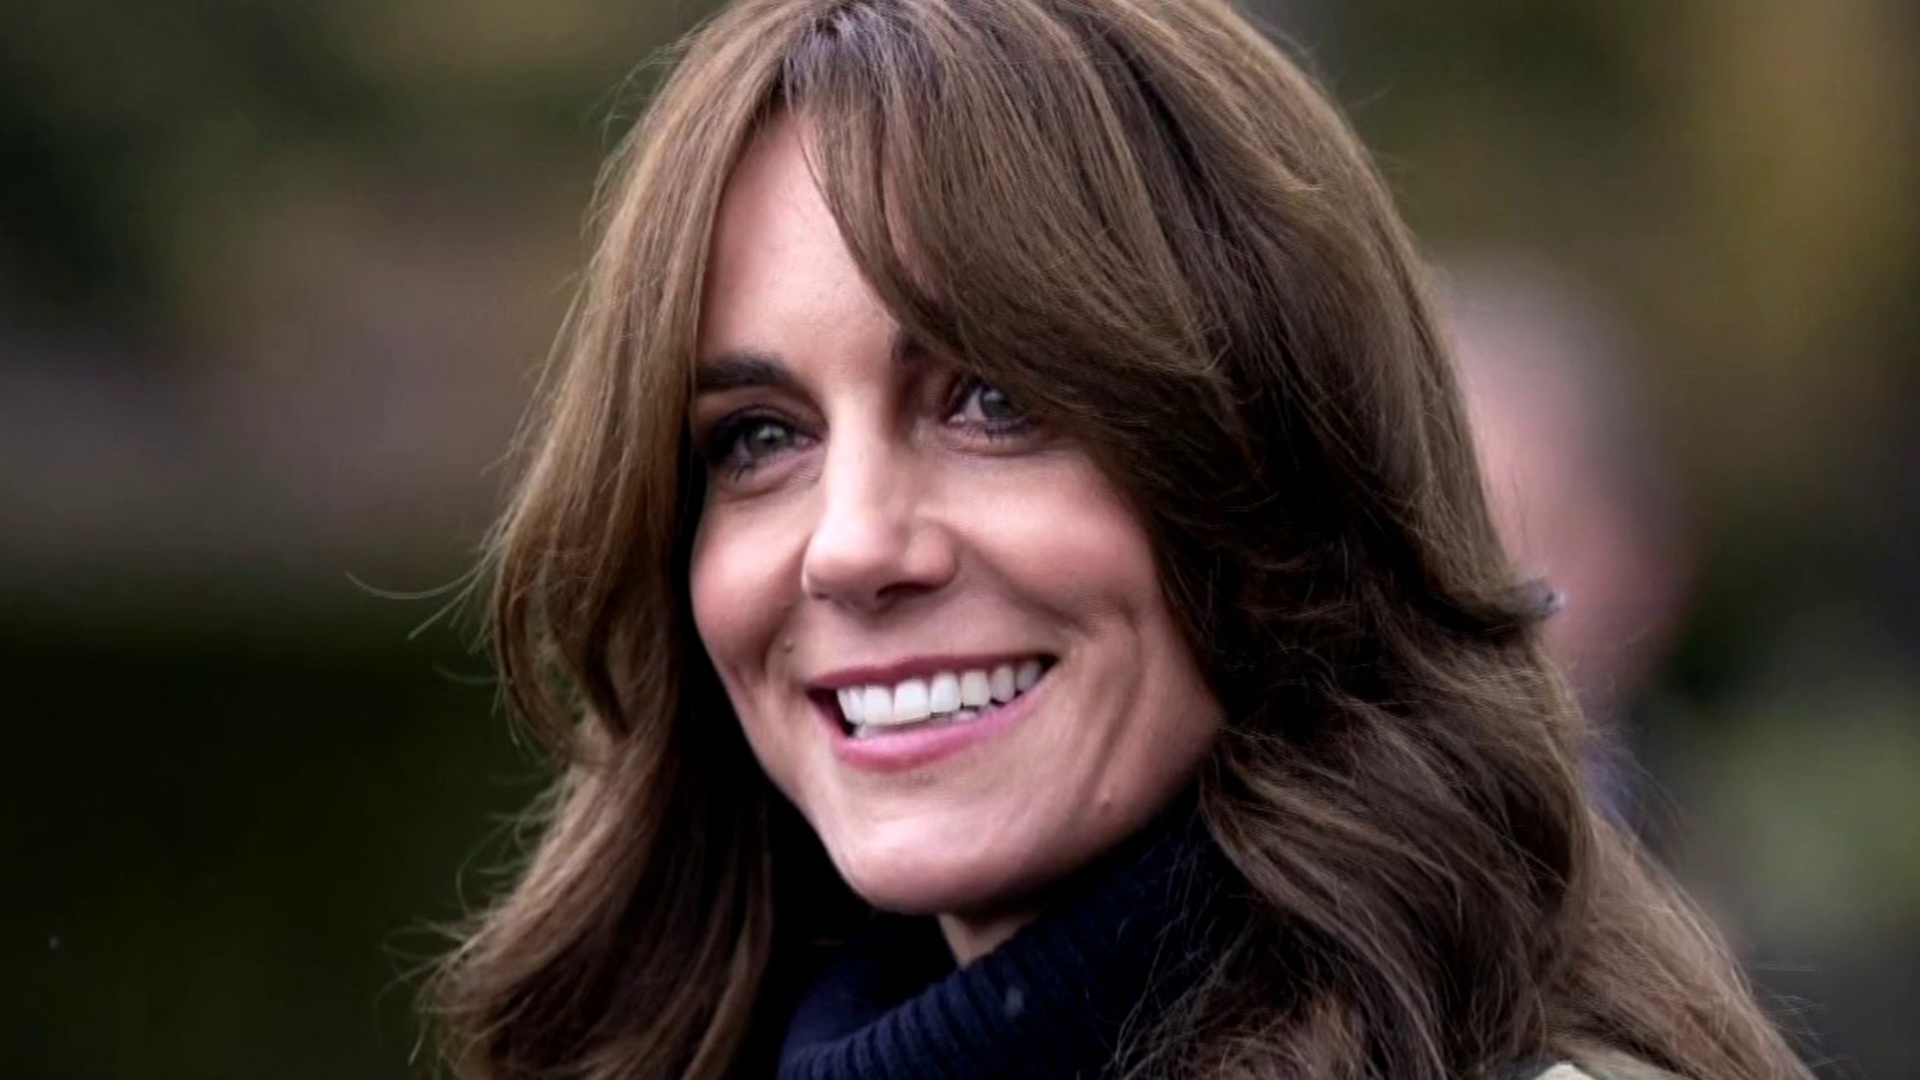 Kate Middleton spotted in new video: Will it calm speculation?